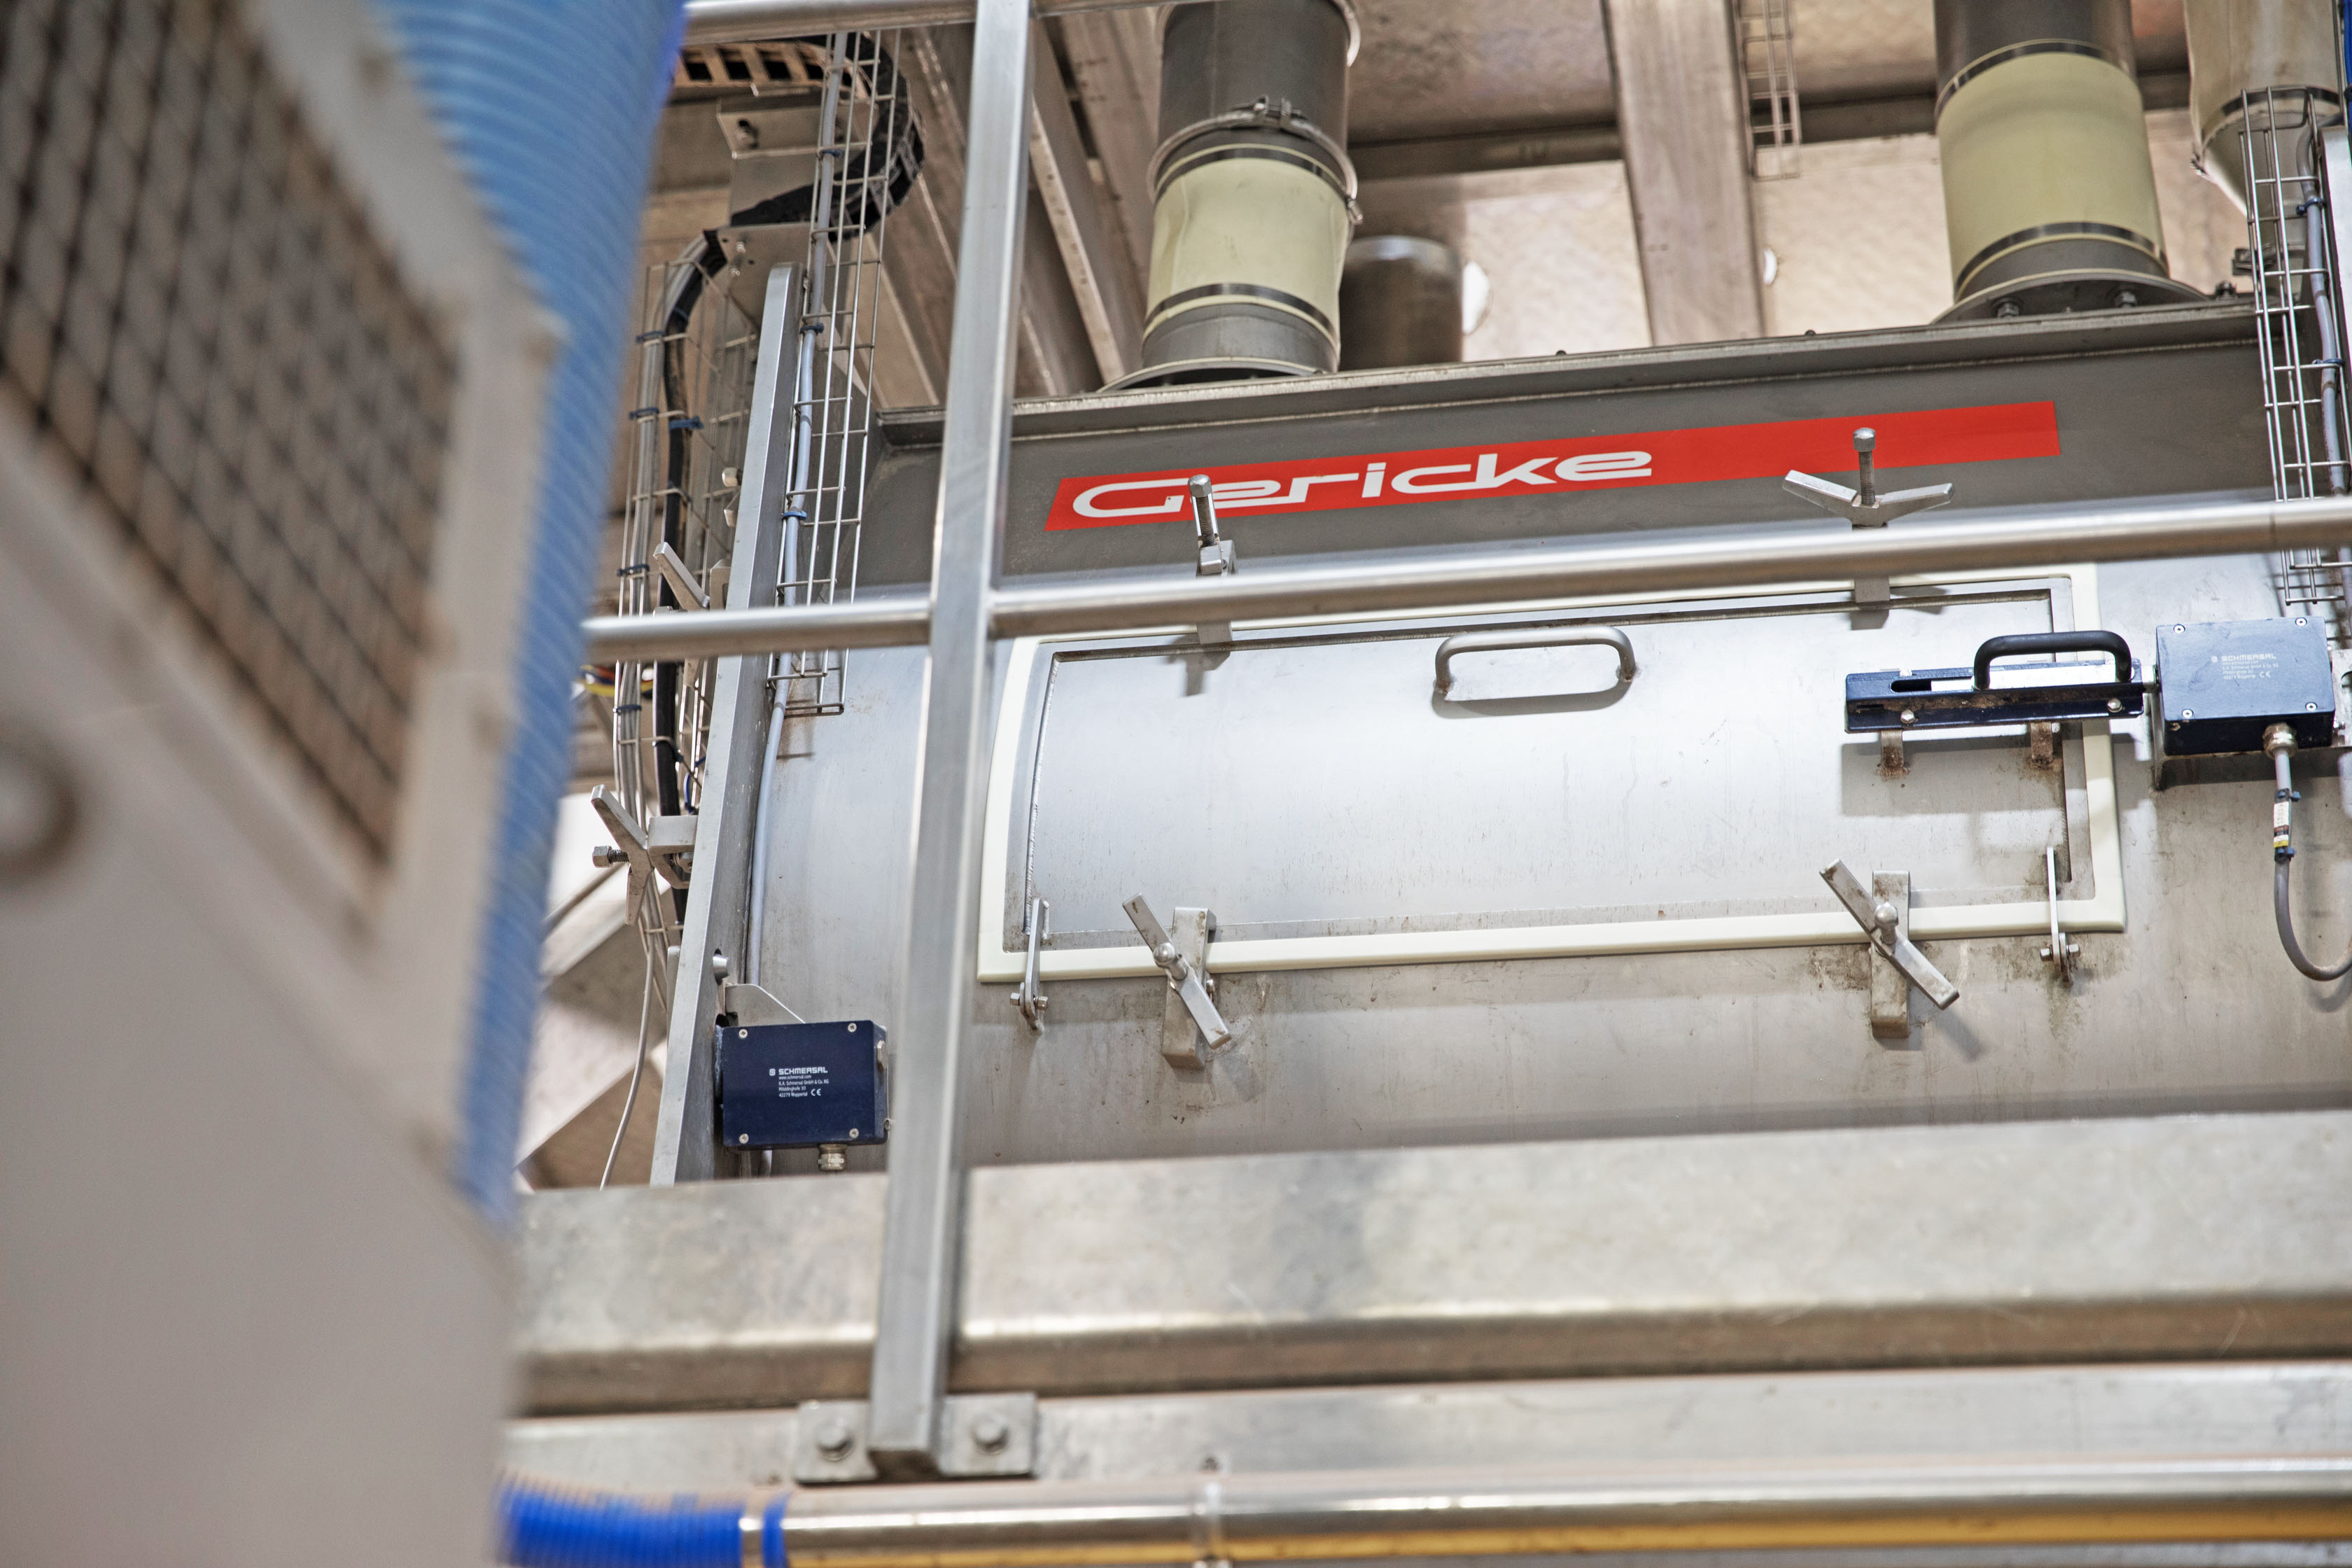 GERICKE GMS Mixer in a food installation in the UK 